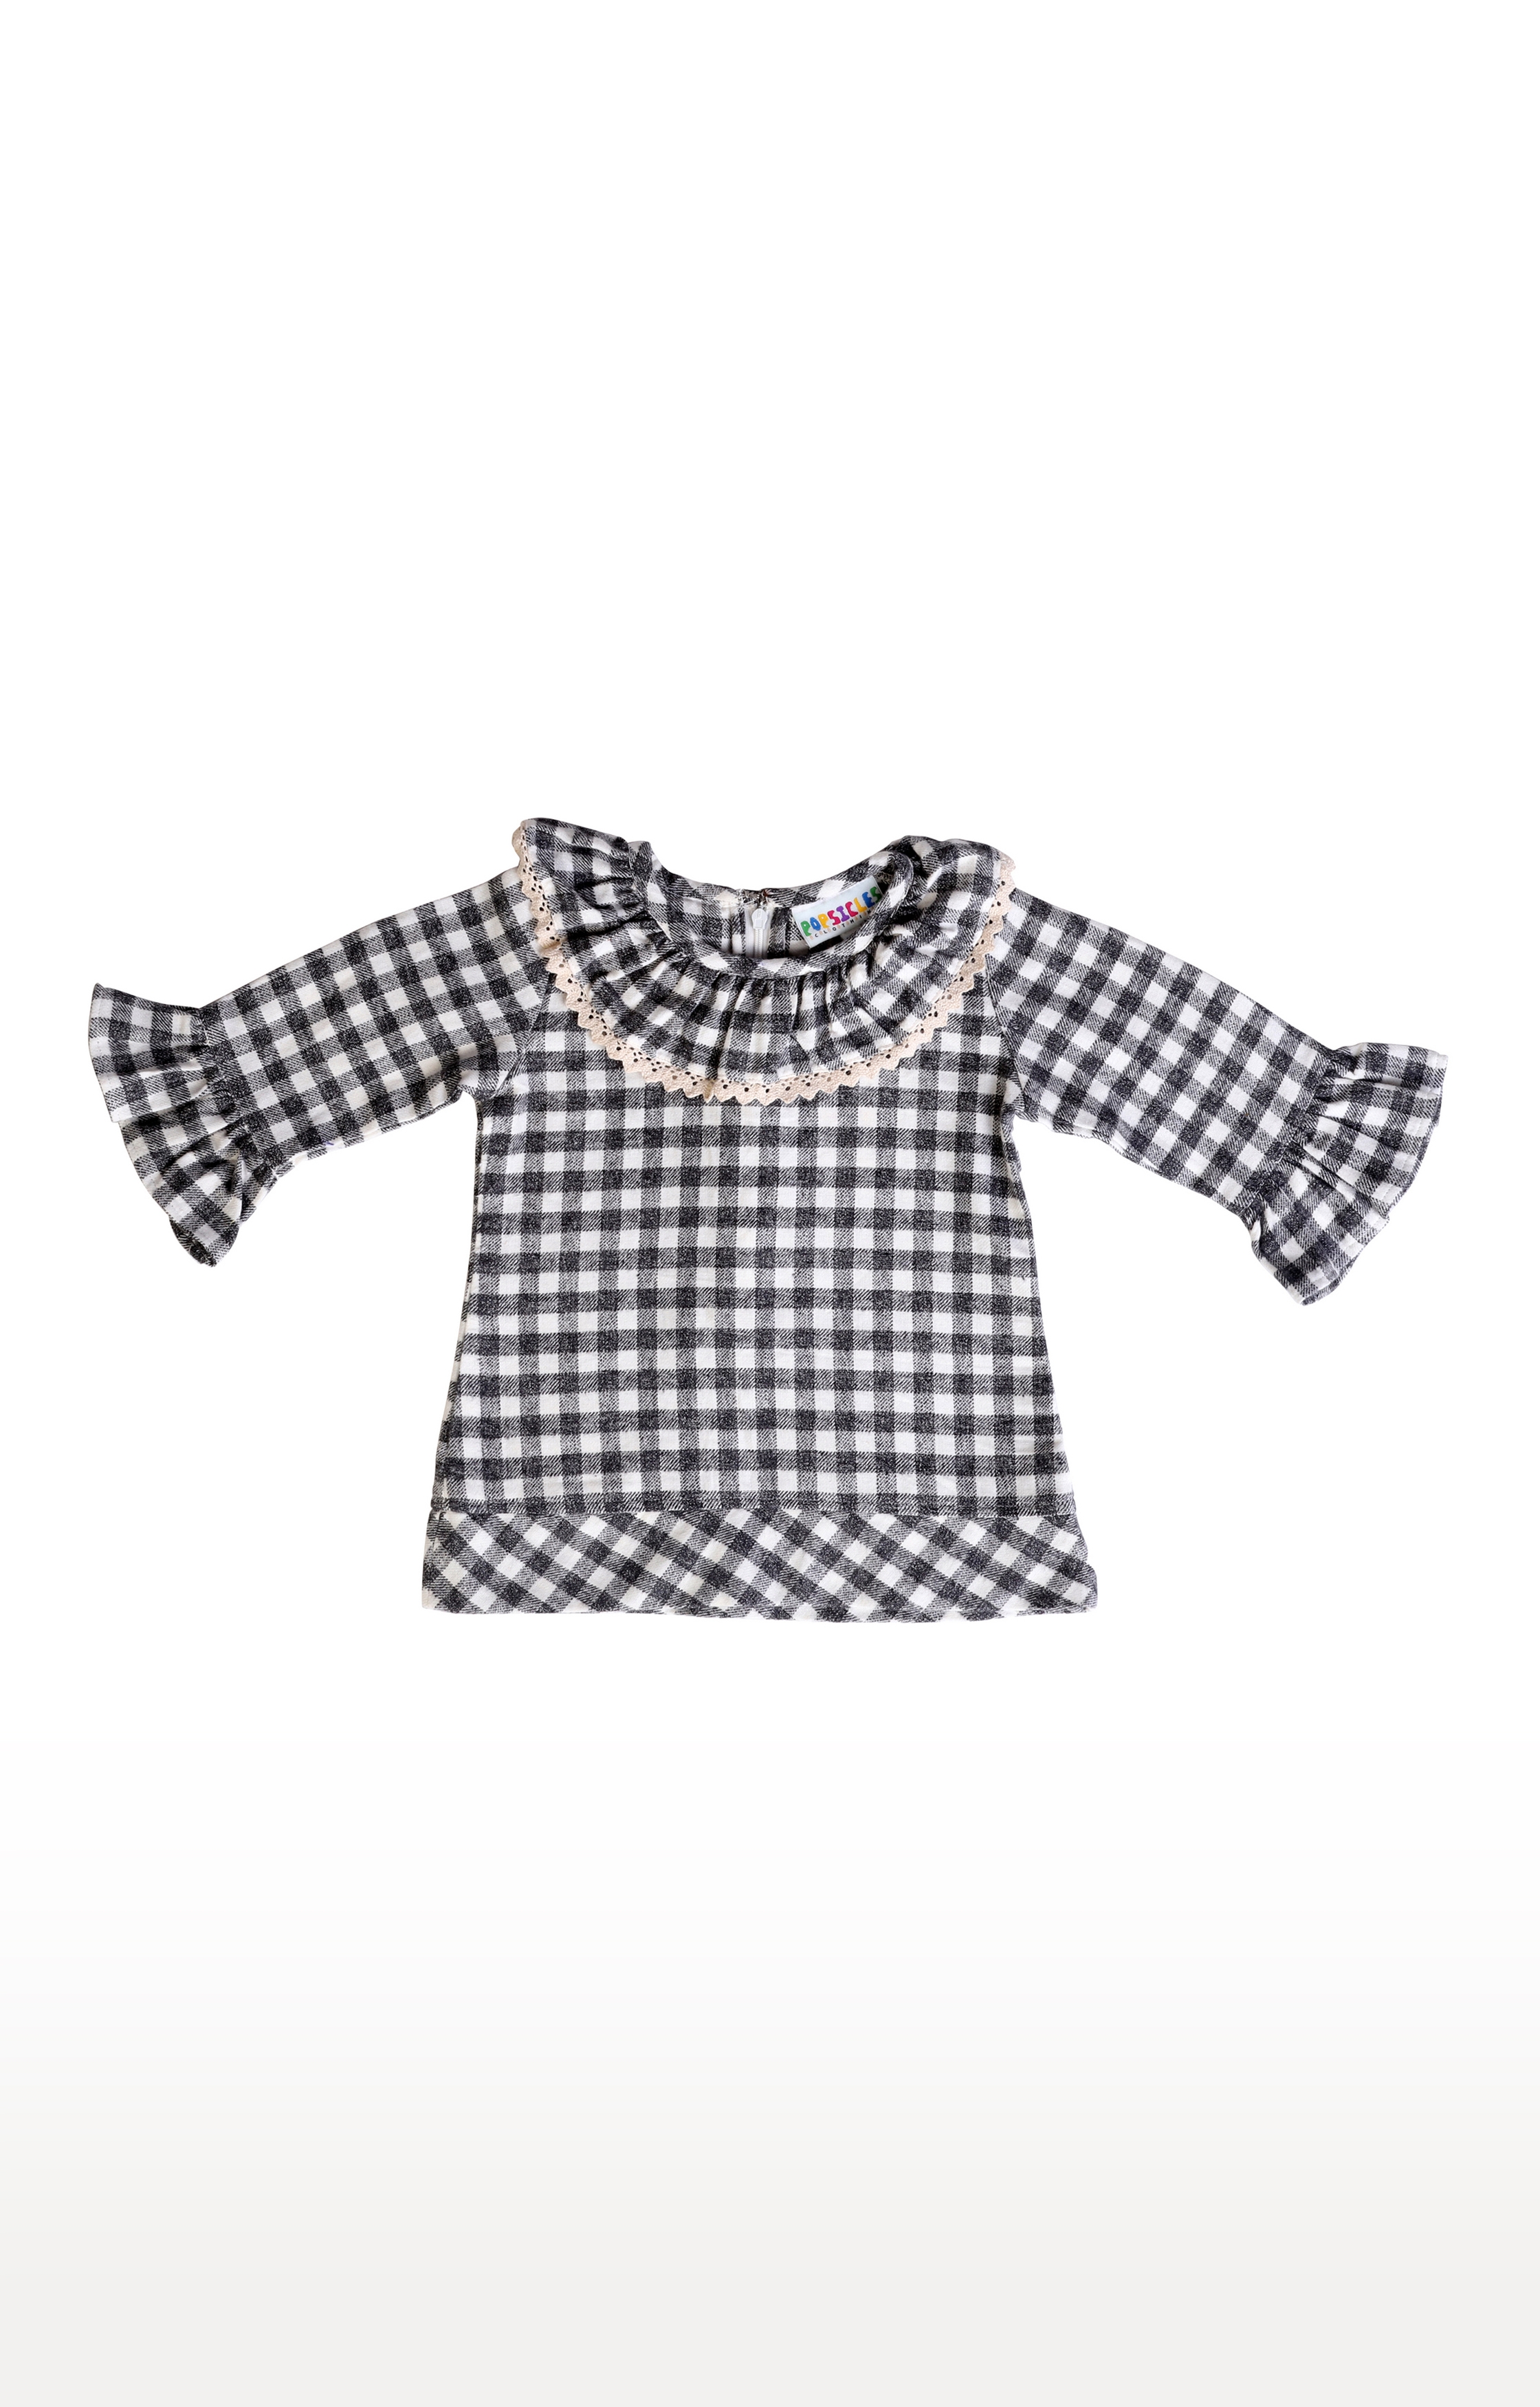 Popsicles Clothing | Popsicles Girls Cotton Checked Shirt Top - Grey (1-2 Years) 0